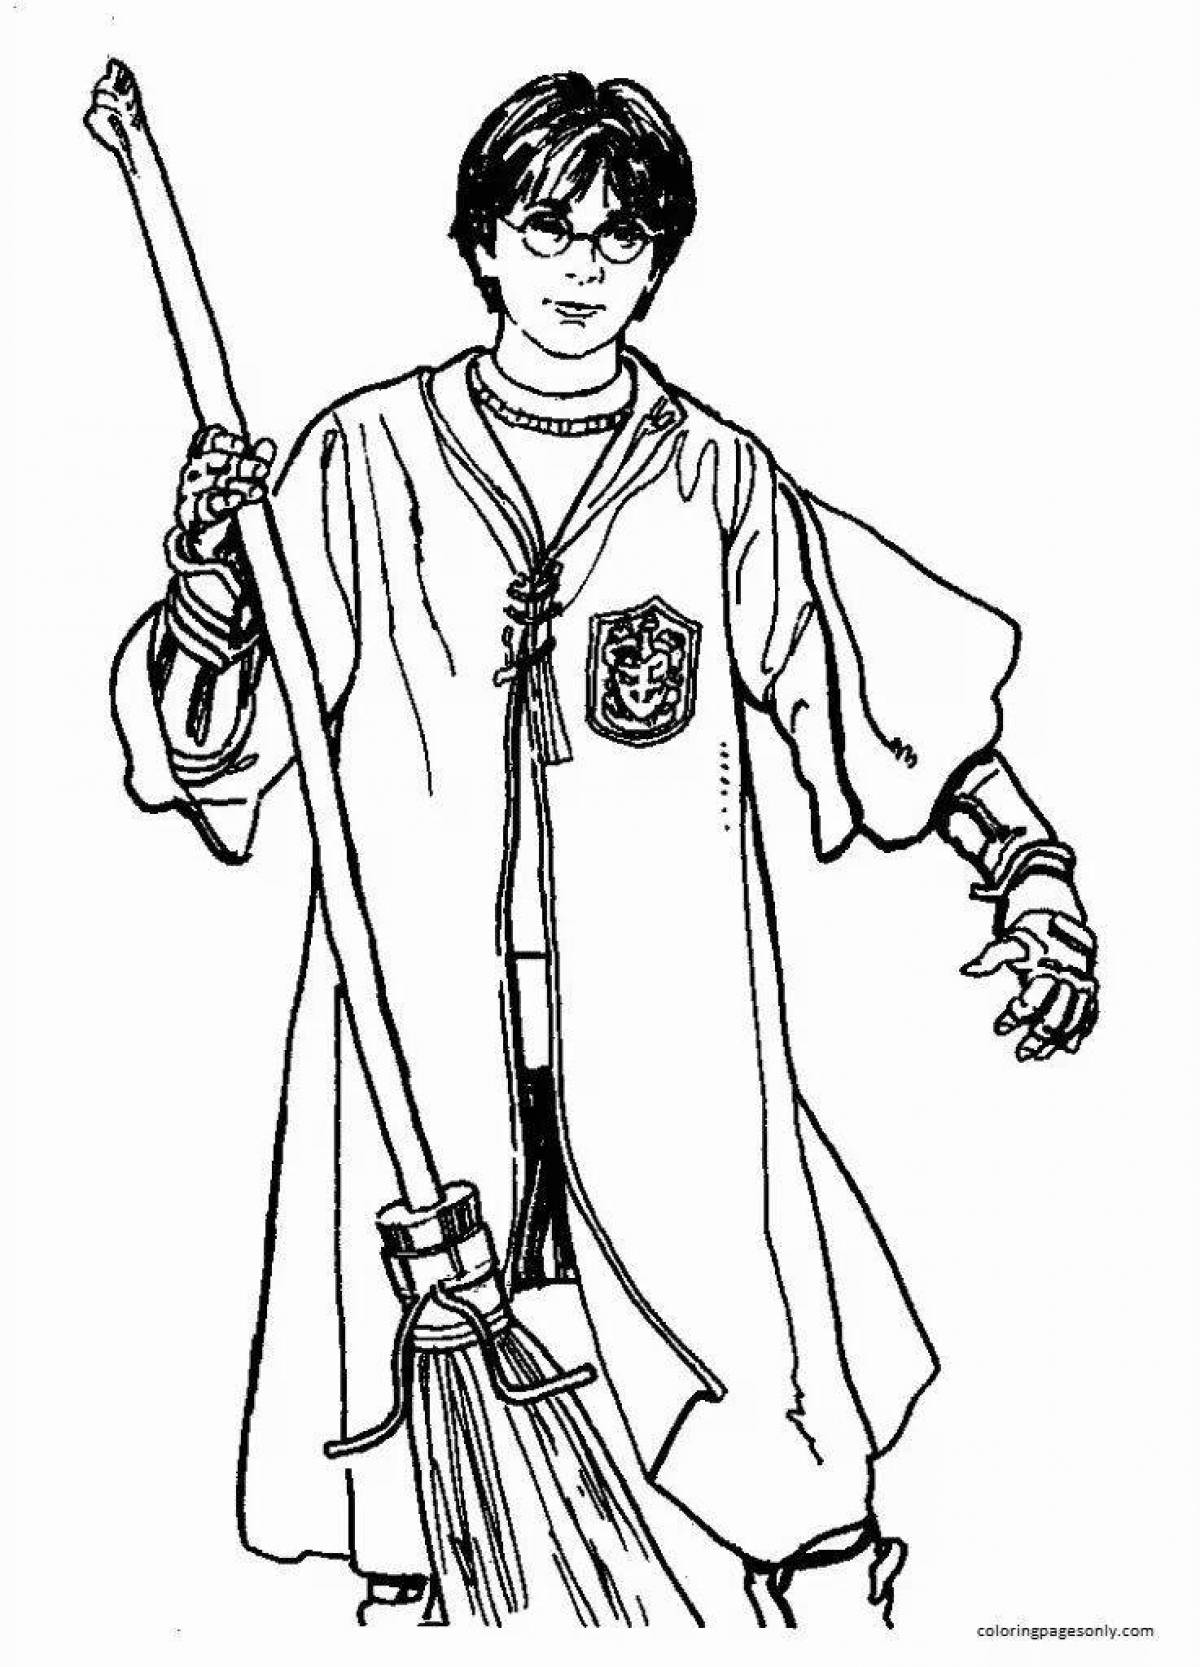 Harry Potter beautiful coloring book